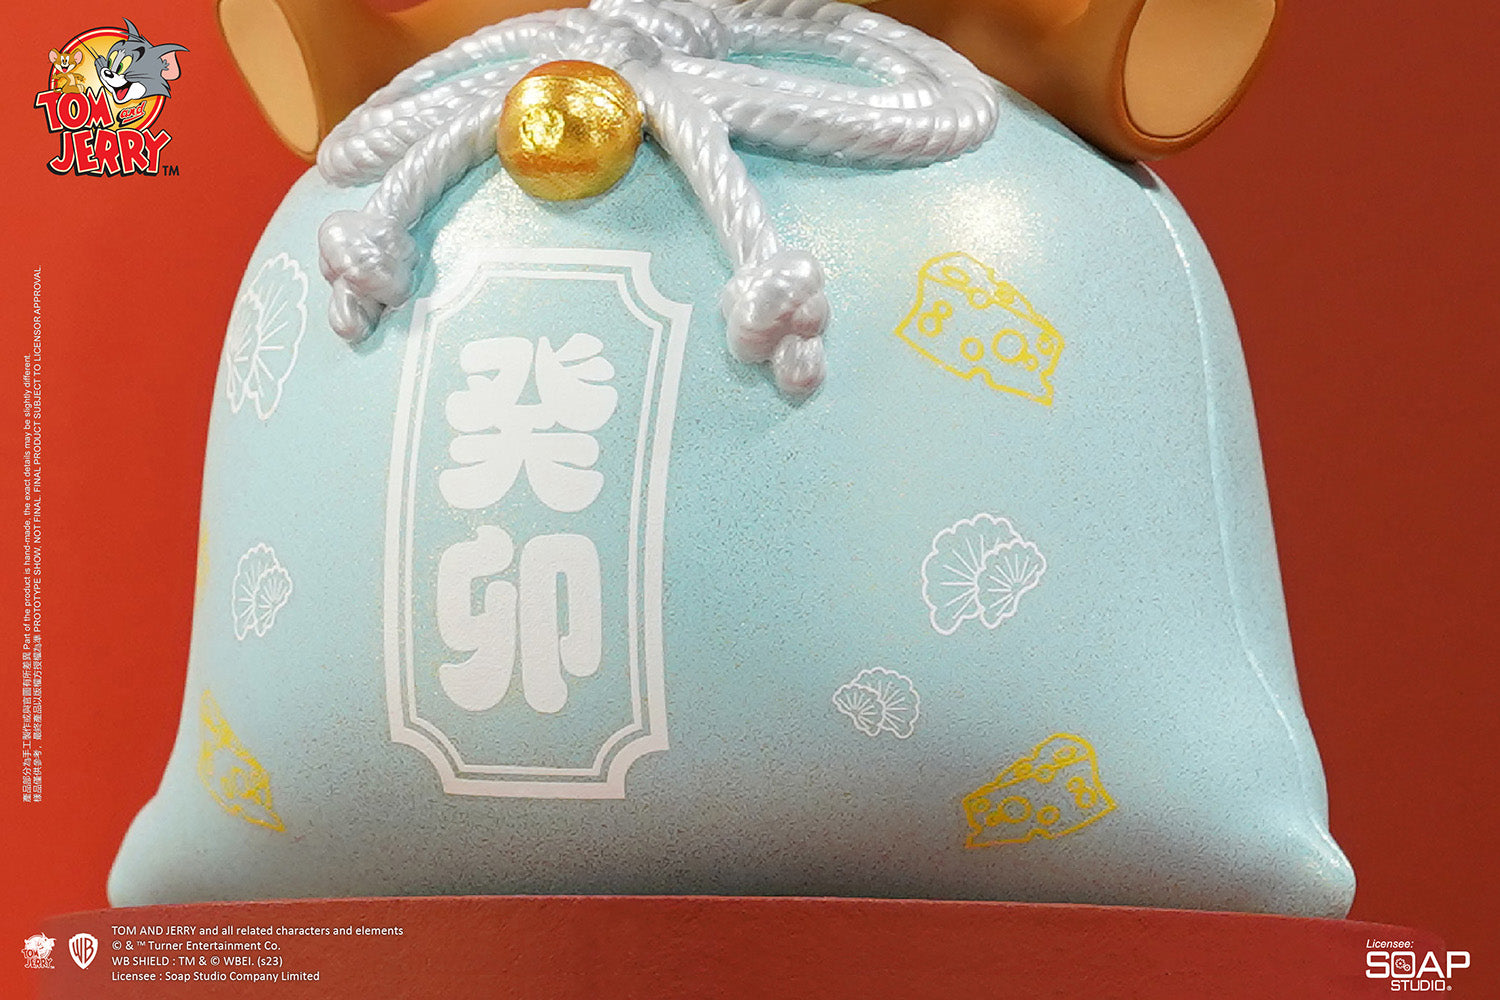 Soap Studio CA297 Tom and Jerry - Jerry's Best Wishes in Year of the Rabbit Omamori